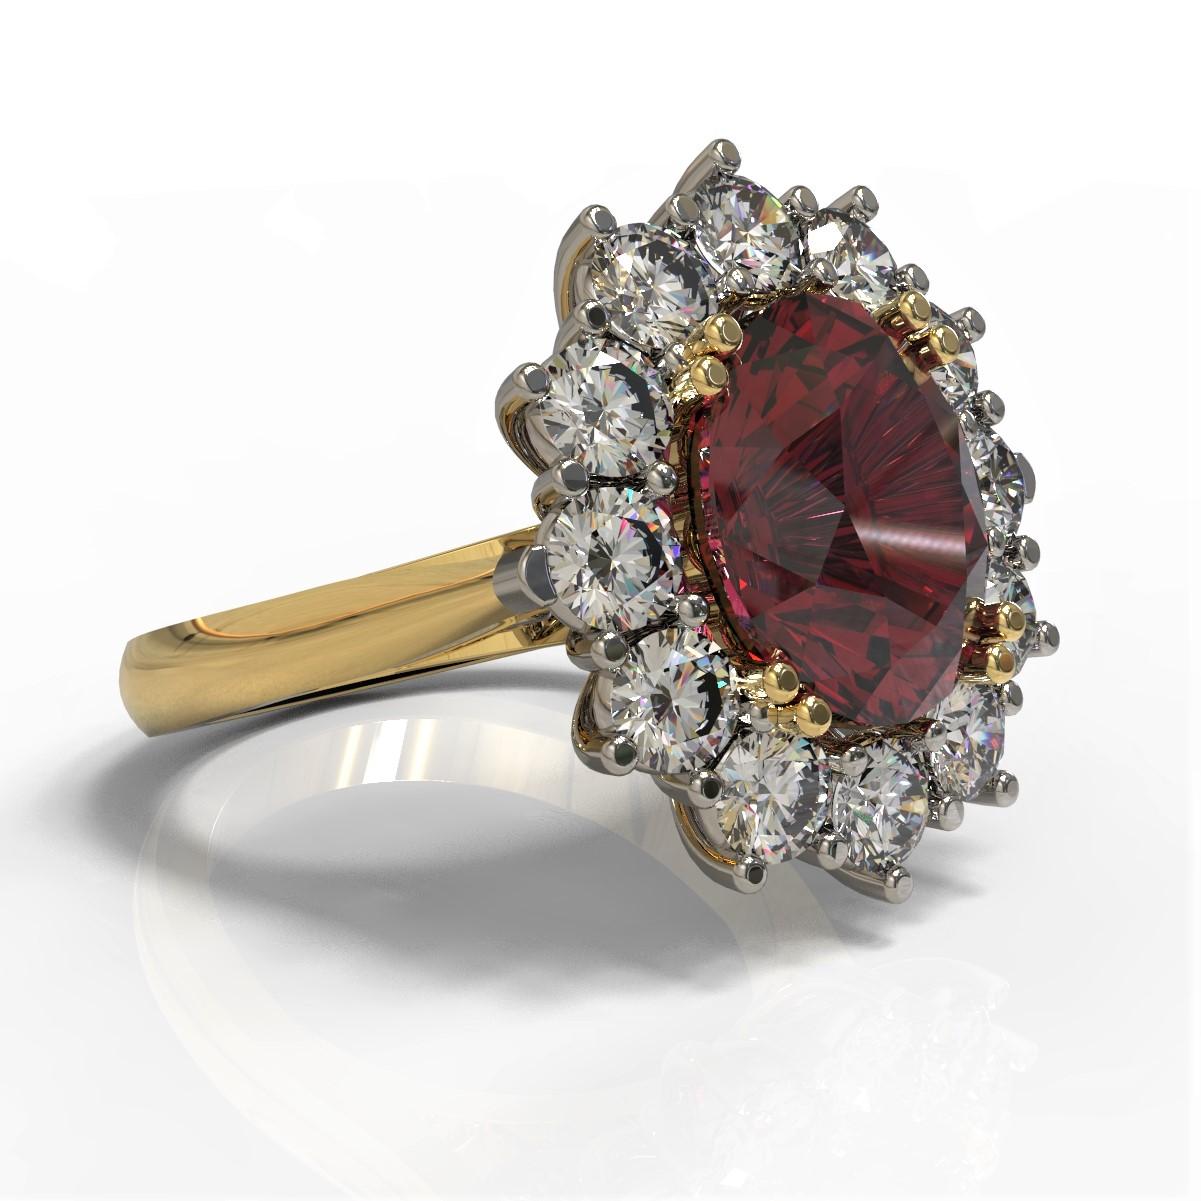 Rosa & Nero Ring

The exquisite platinum and 18 carat yellow gold cluster ring features a stunning oval cut rhodolite garnet and round brilliant cut diamonds. The band and the setting of the Rhodolite made in 18 carat yellow gold and the halo made